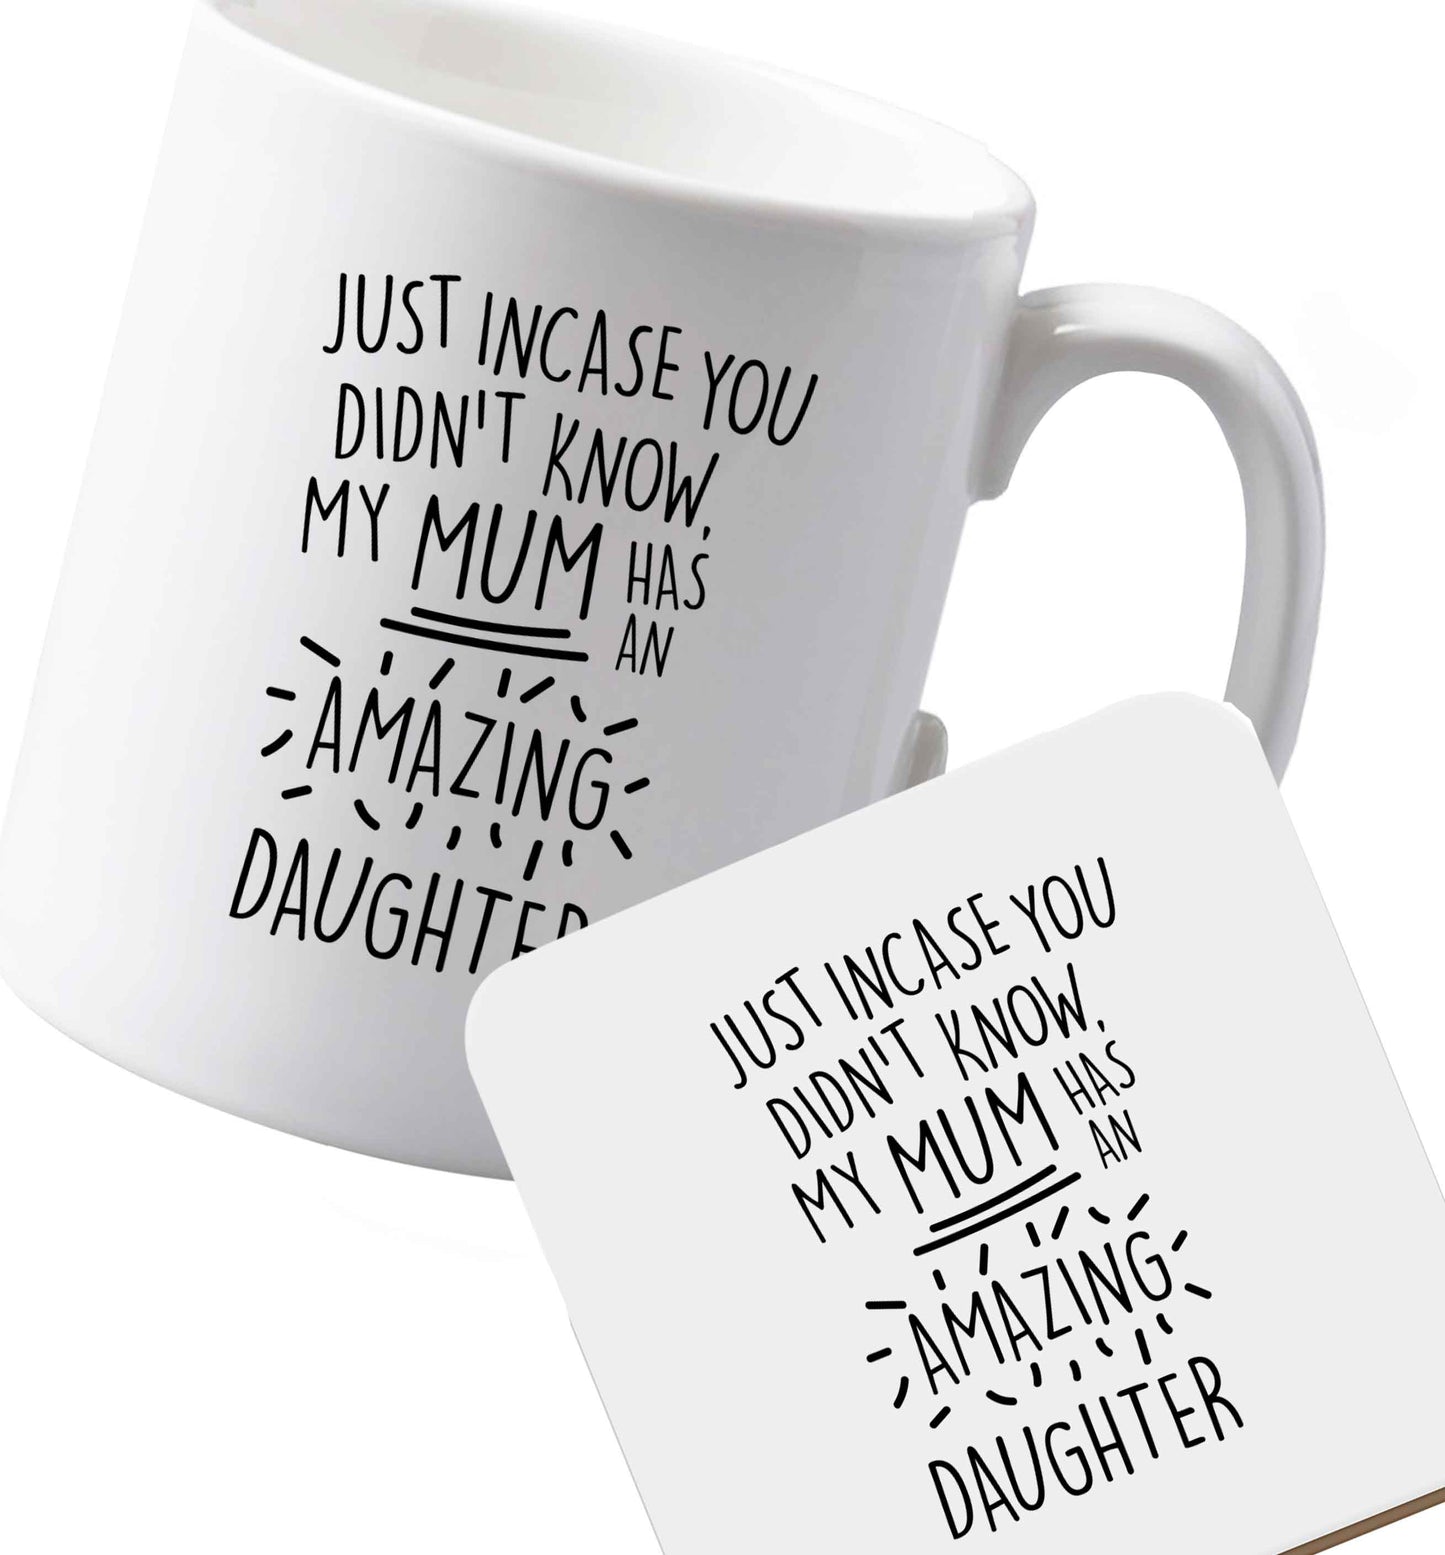 10 oz Ceramic mug and coaster Just incase you didn't know my mum has an amazing daughter both sides